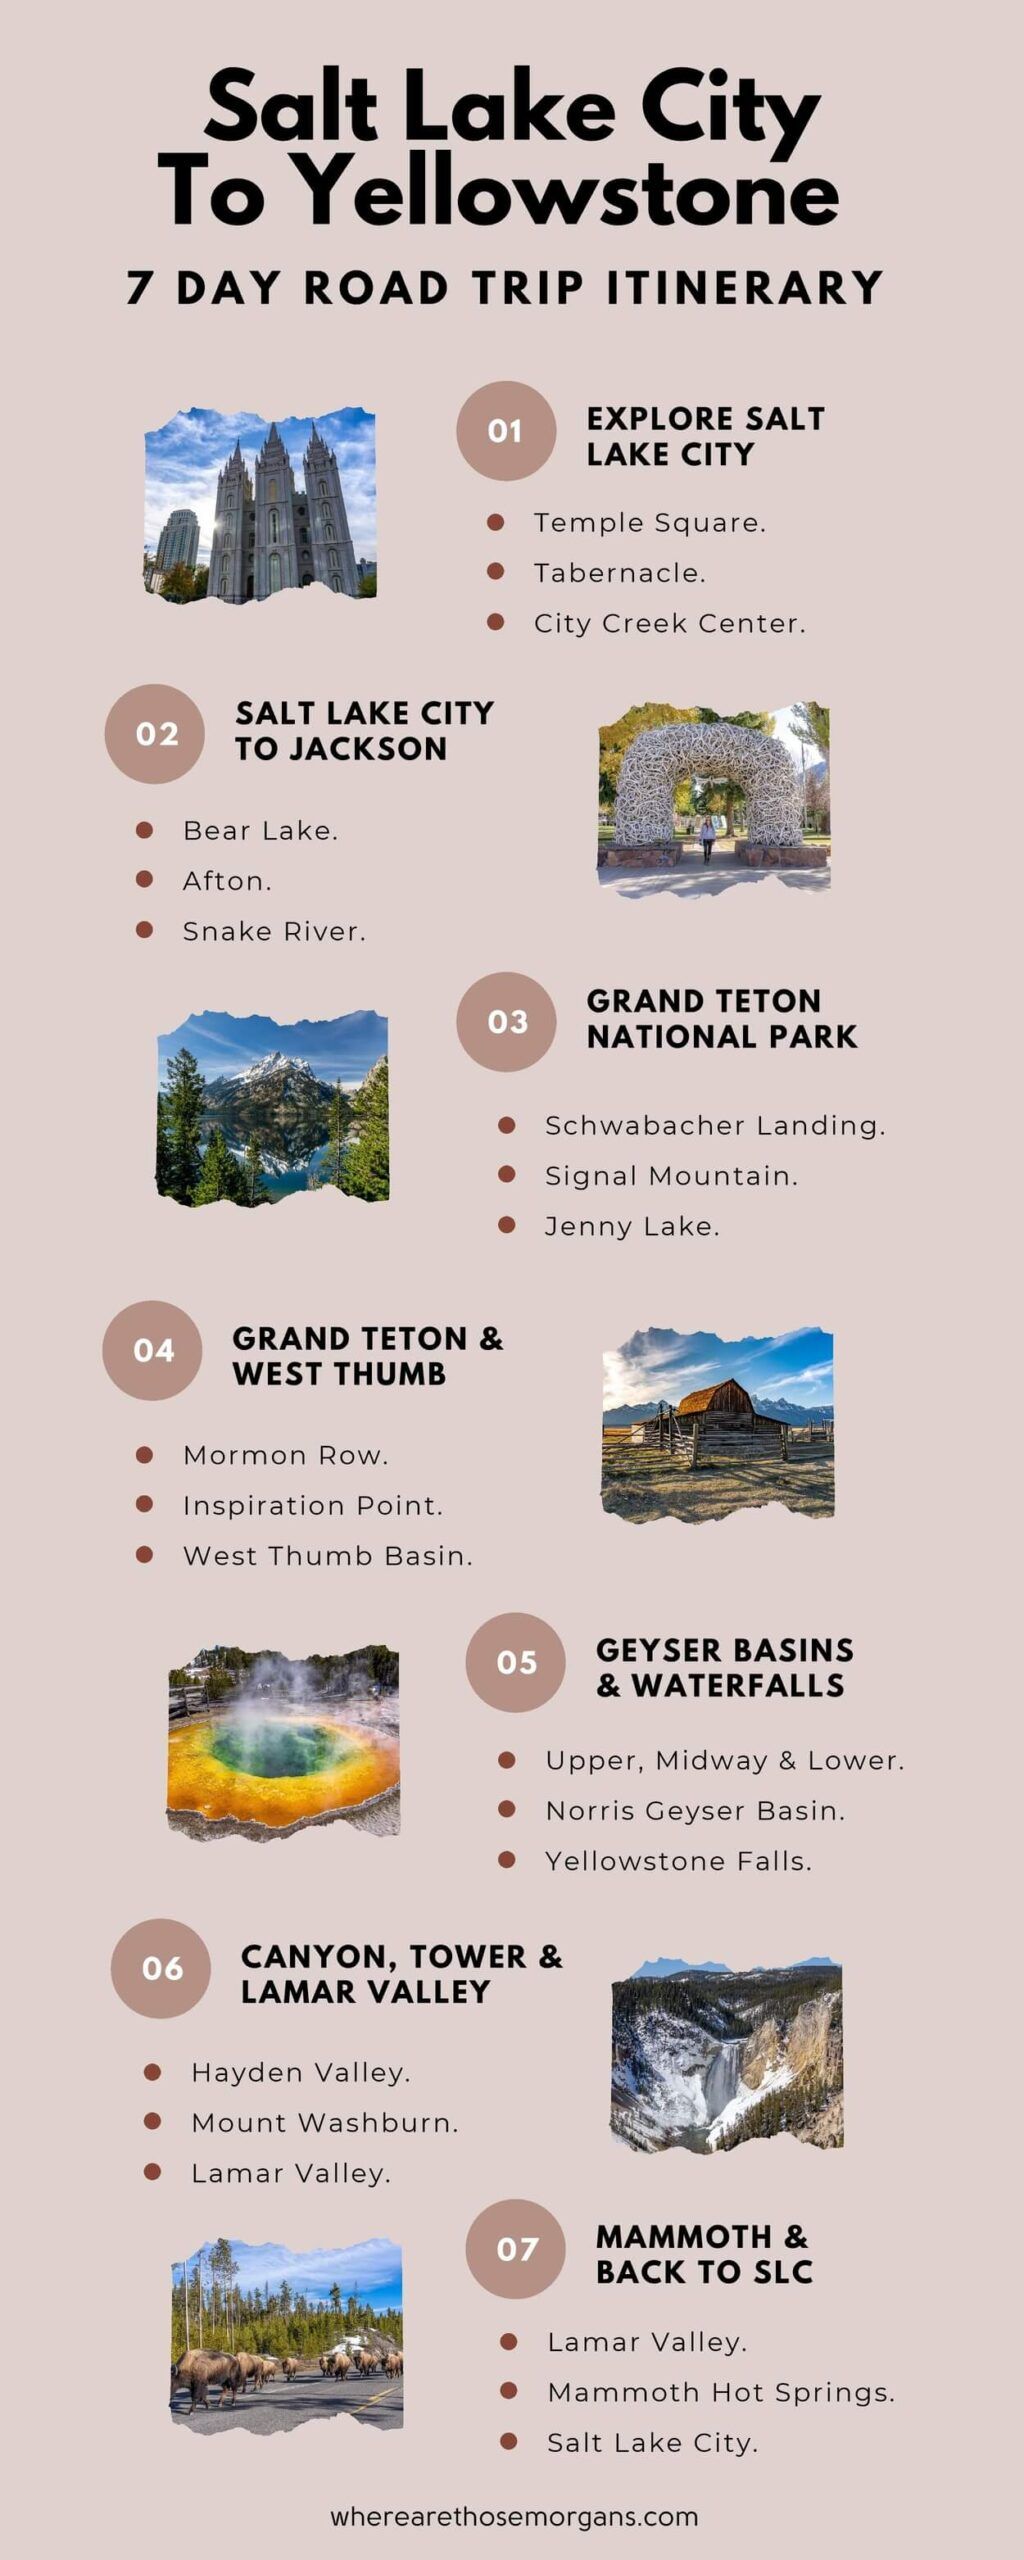 Infographic showing an efficient 7 day road trip itinerary from salt lake city to grand teton and yellowstone with a breakdown of each day